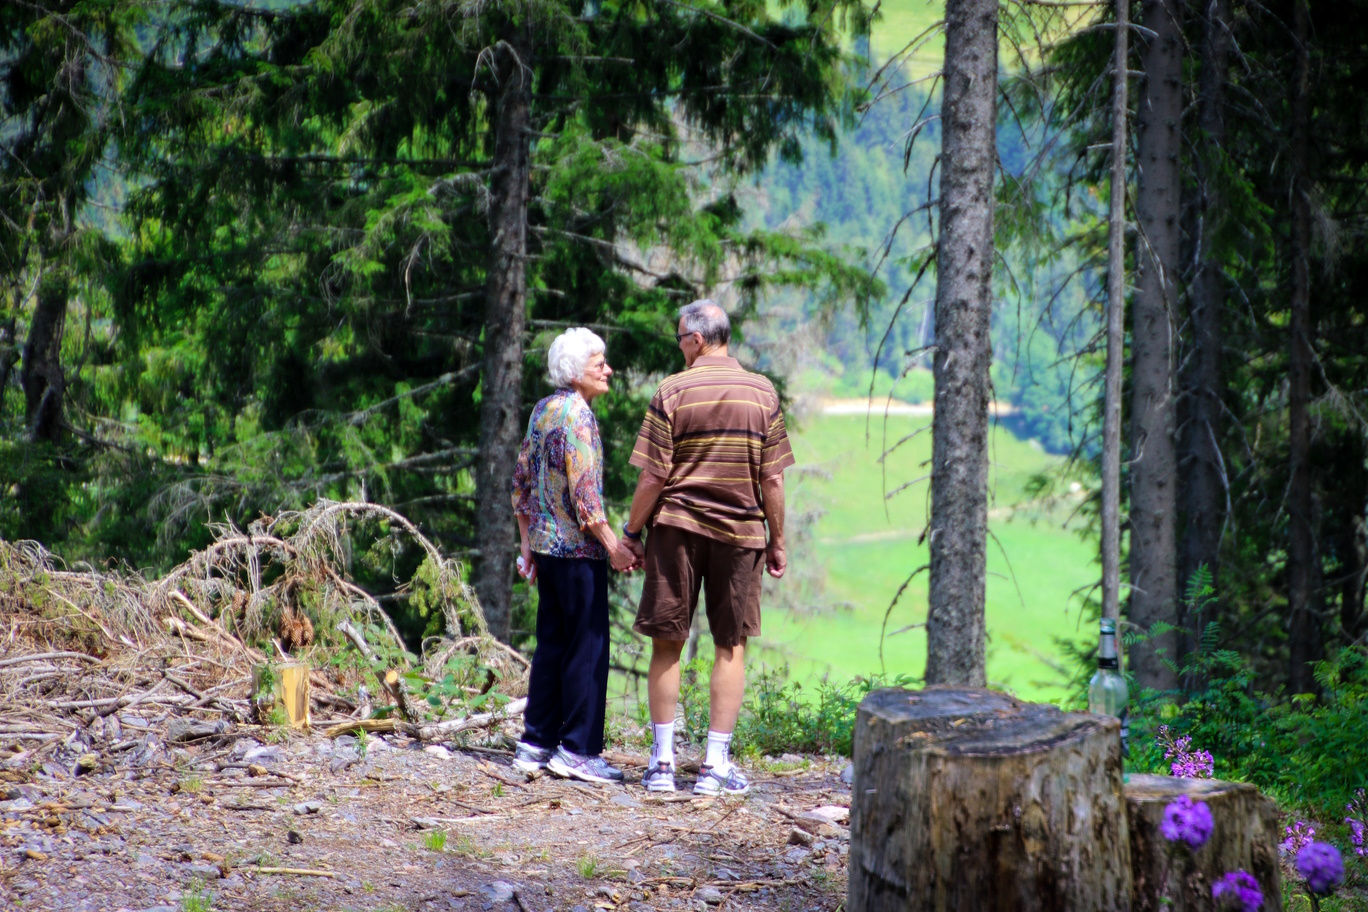 Image of previous post - Seven Benefits for Seniors of Spending Time Outdoors